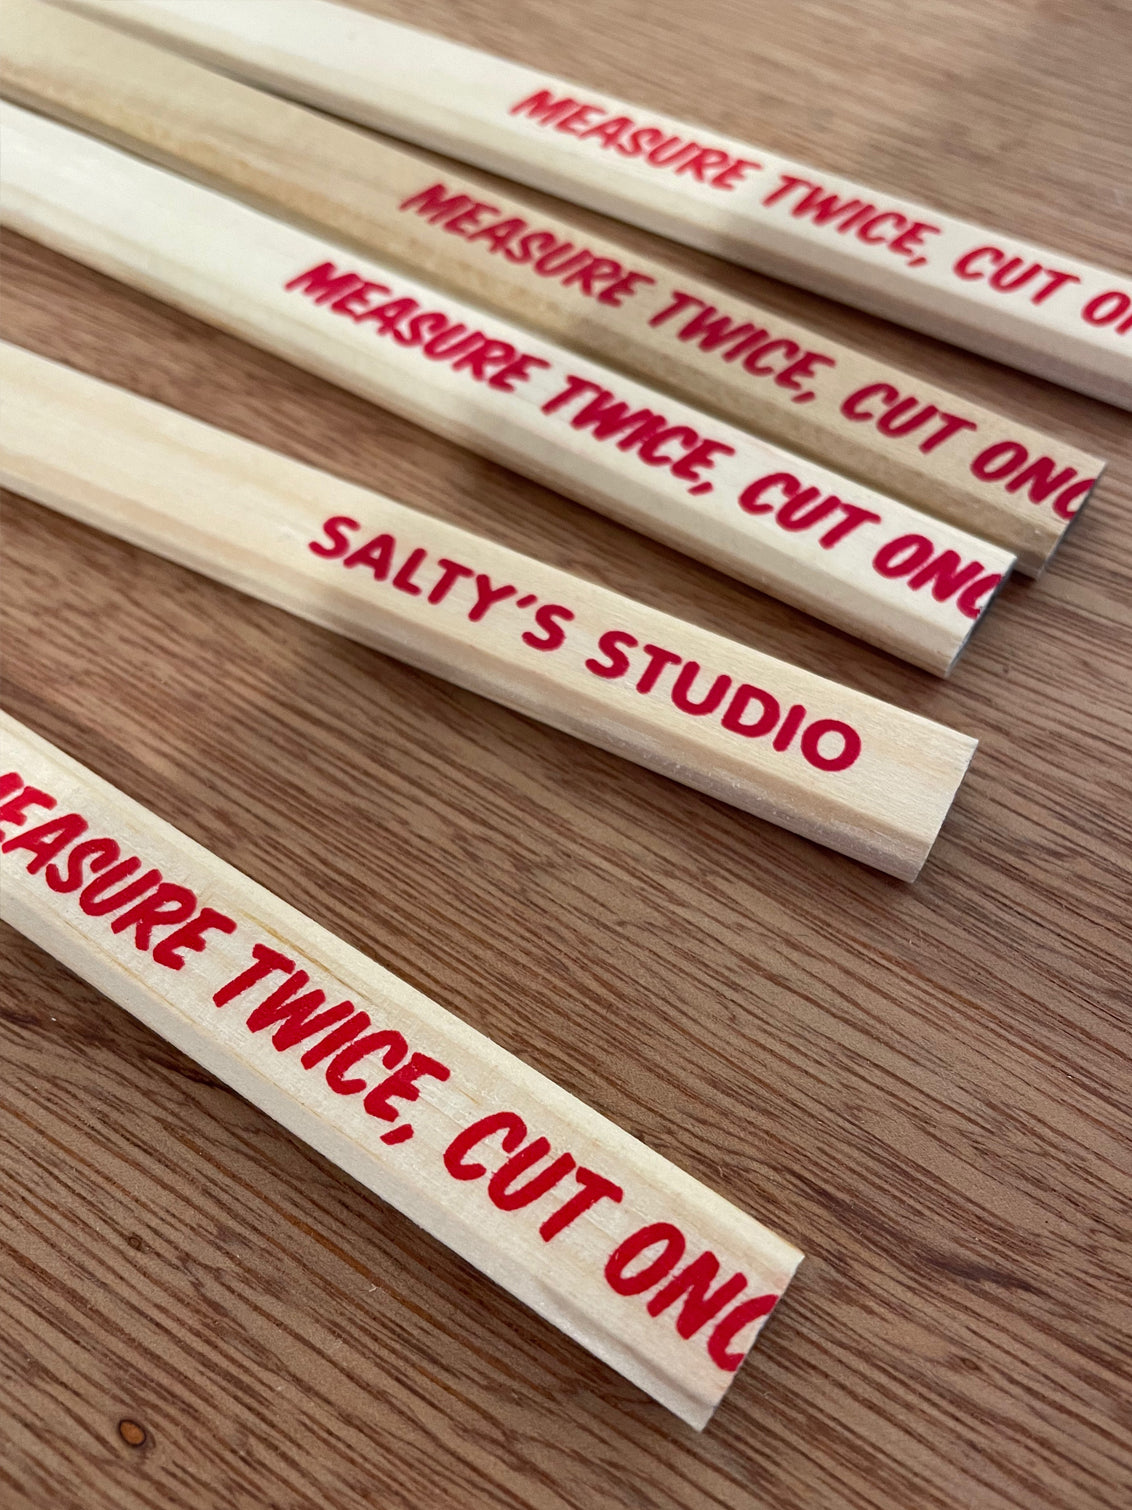 Wooden flat carpenters pencils laid on a wooden table. The pencils have a slogan Measure Twice Cut Once screenprinted at one end in red ink - the joke is that last word has been cut off, or mispositioned. The rear reads Salty's Studio